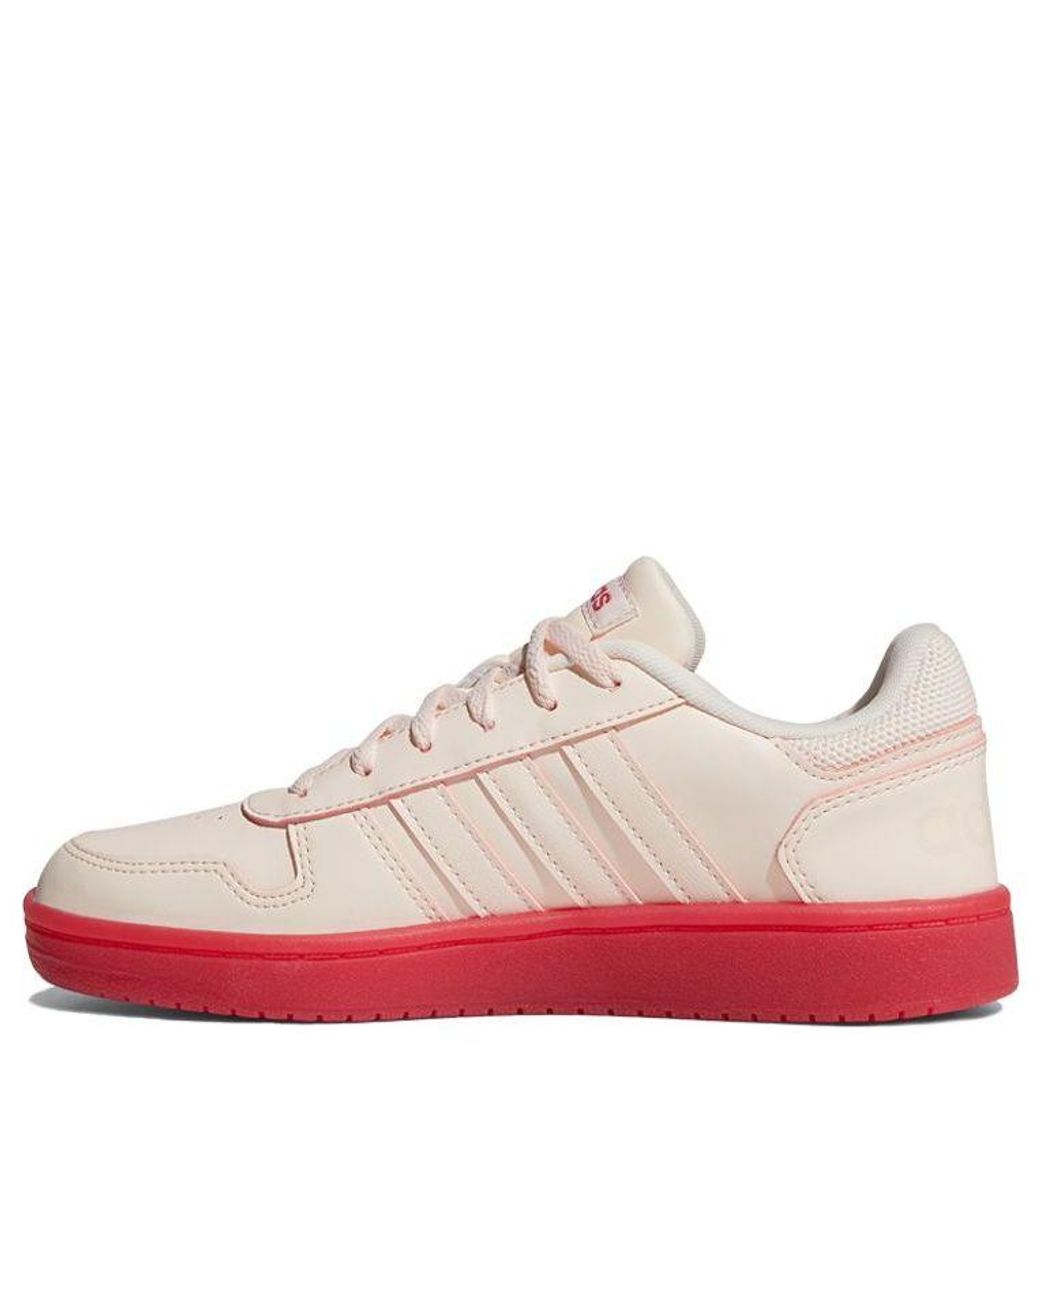 Adidas Neo Hoops 2.0 in White | Lyst